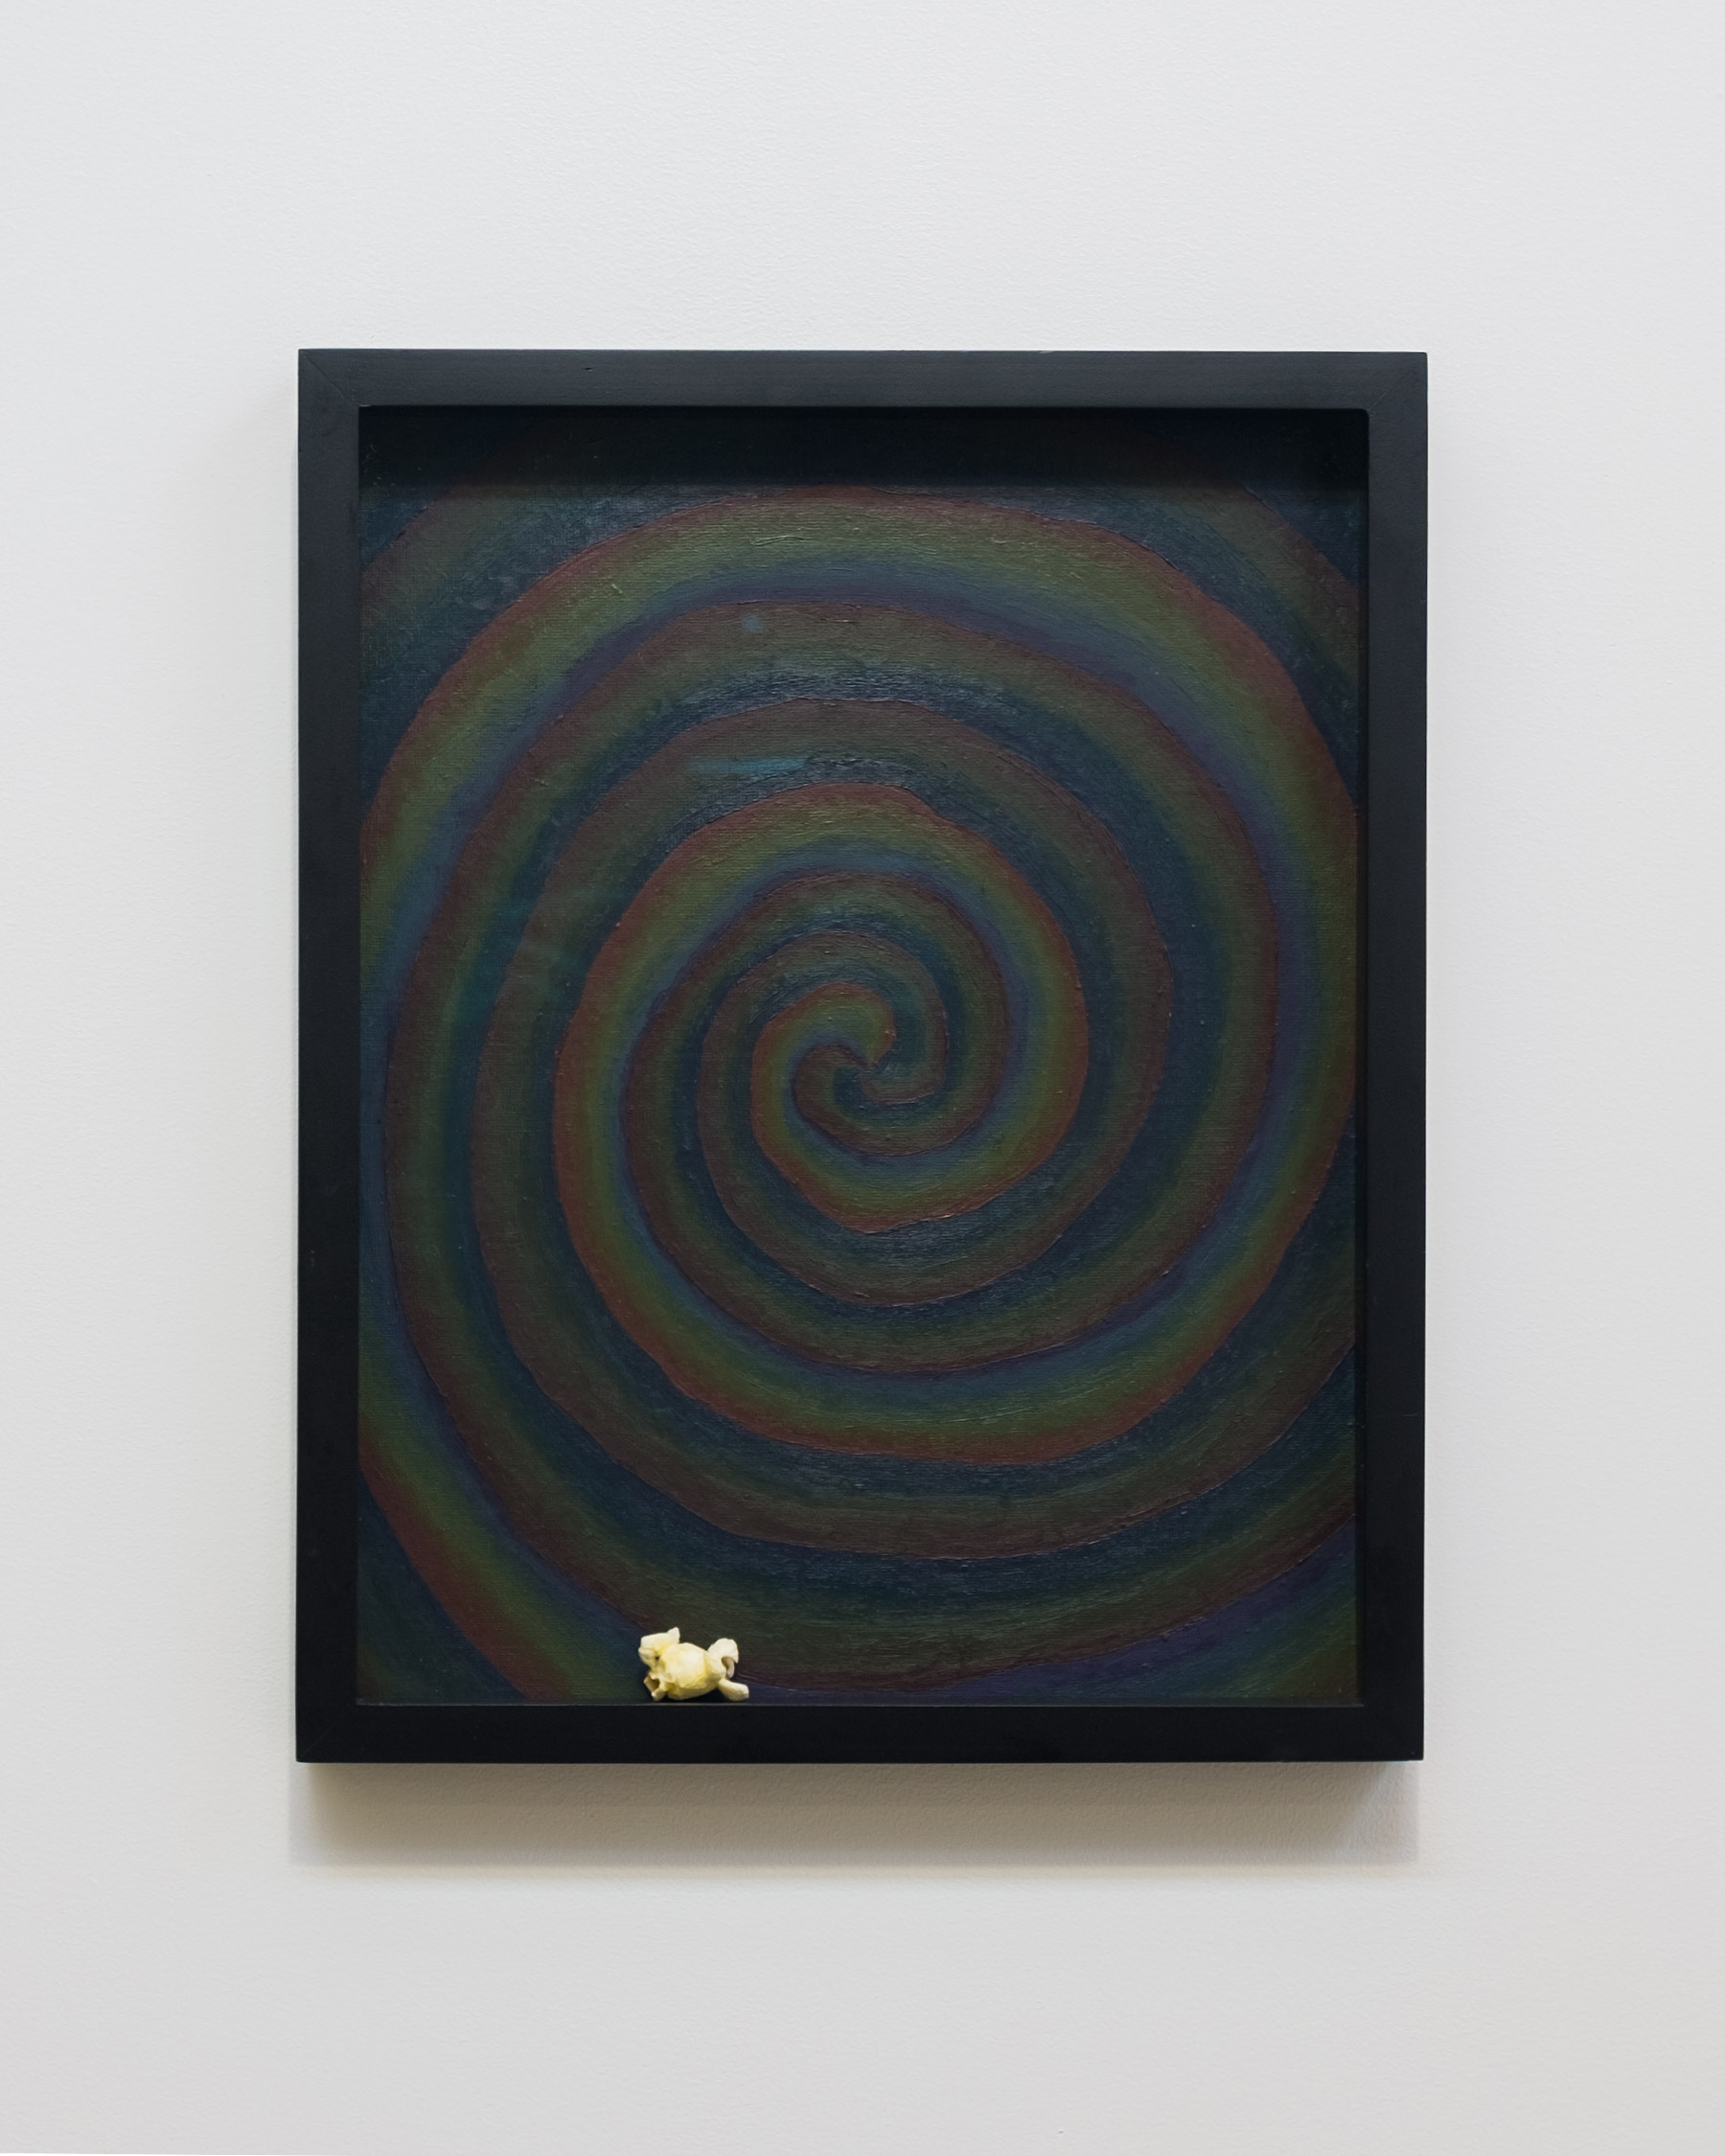 Alex Kwartler, Unititled (with popcorn), 2018, oil on canvas board, popcorn, 14h x 11w in.